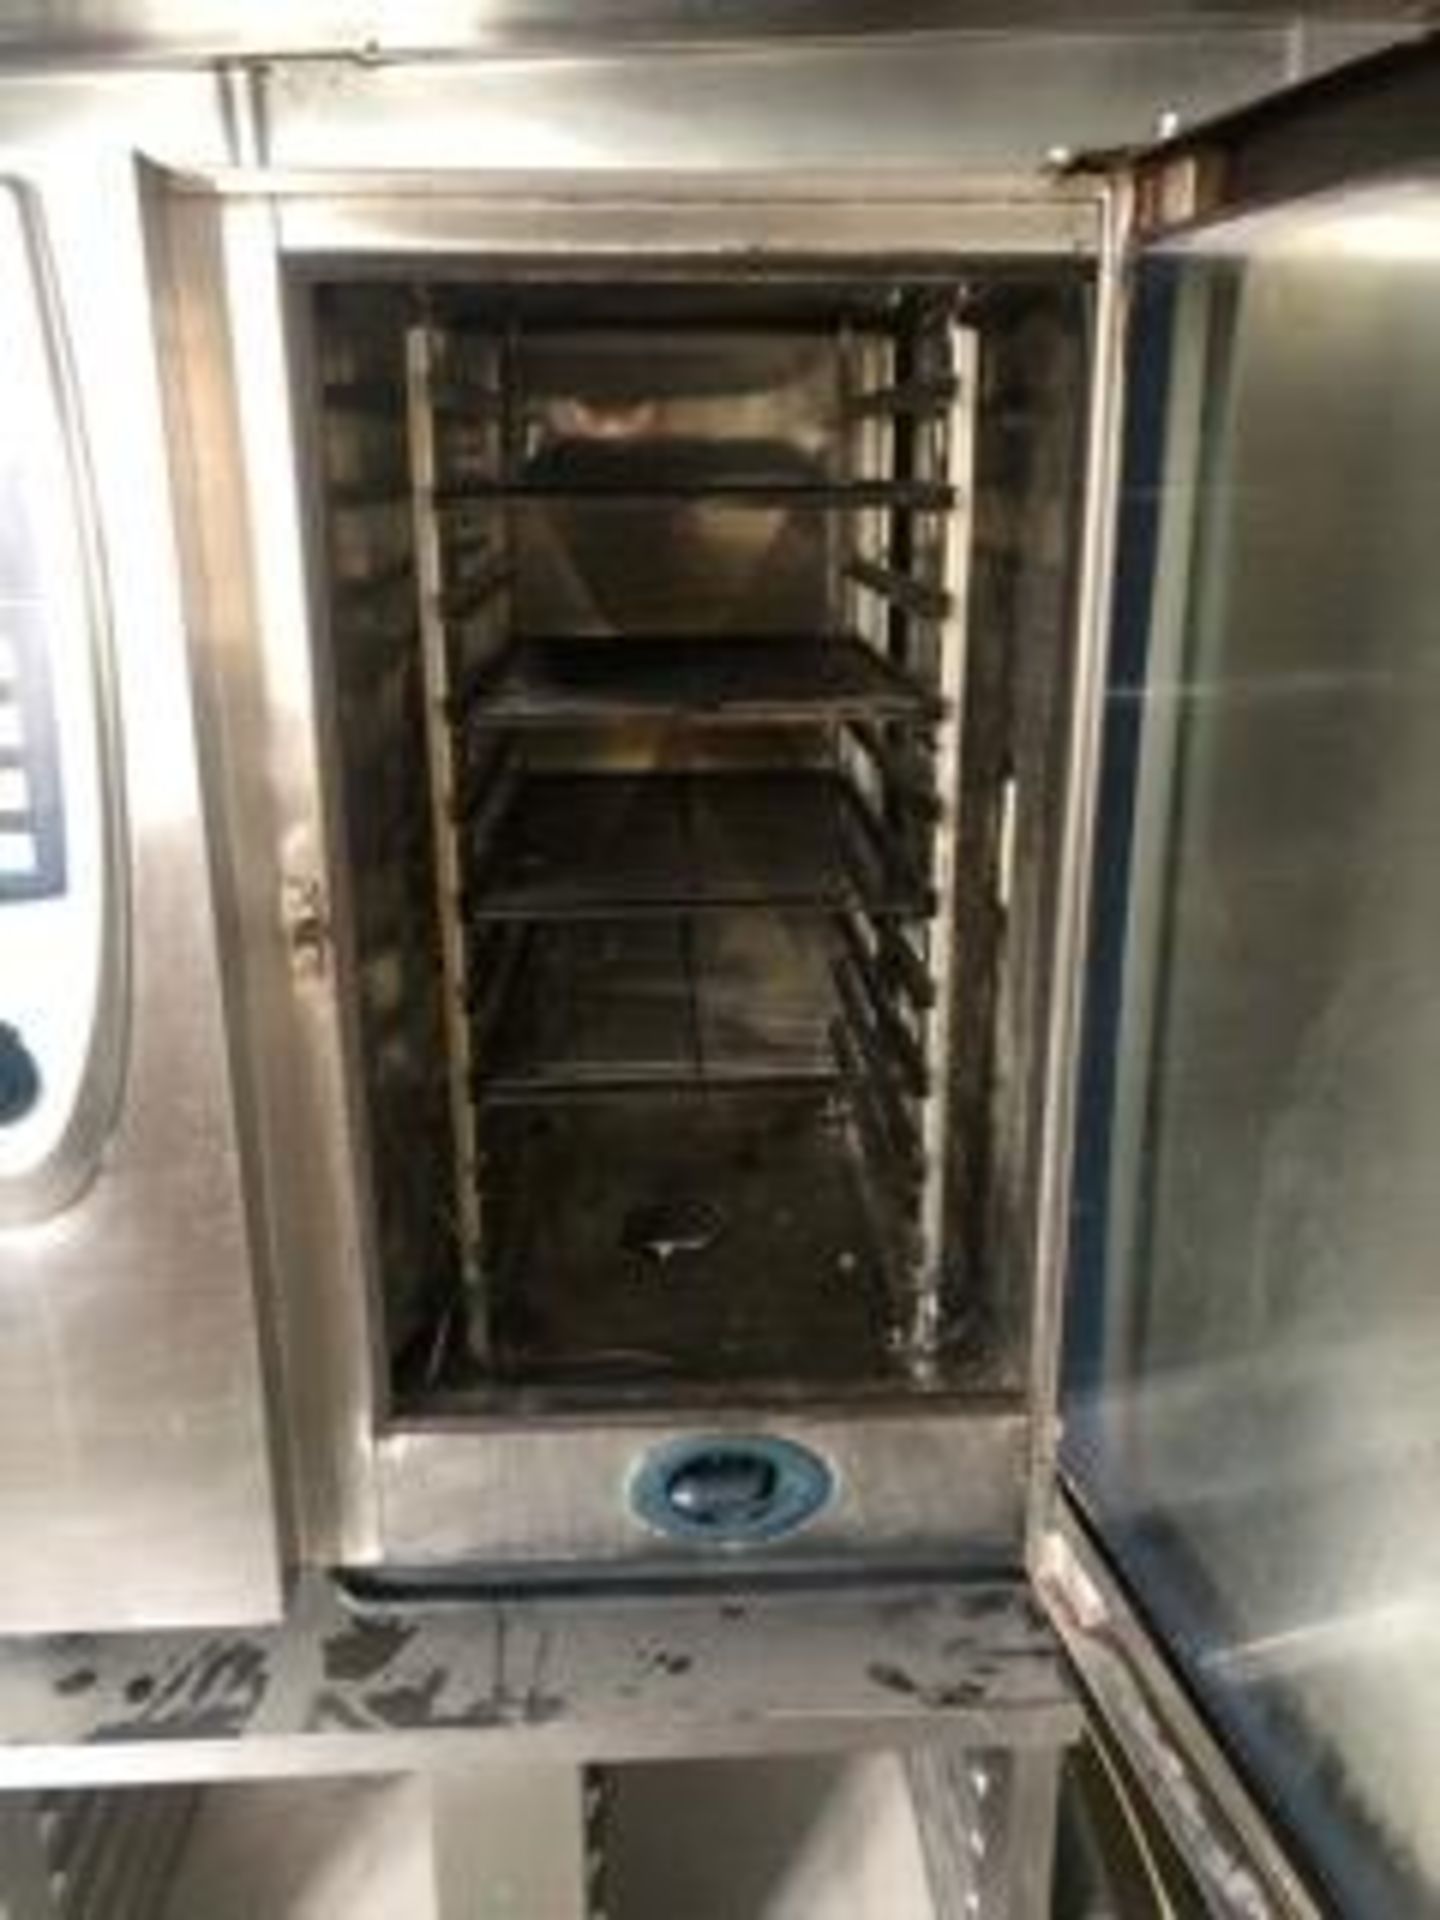 Rational Oven - Image 3 of 3